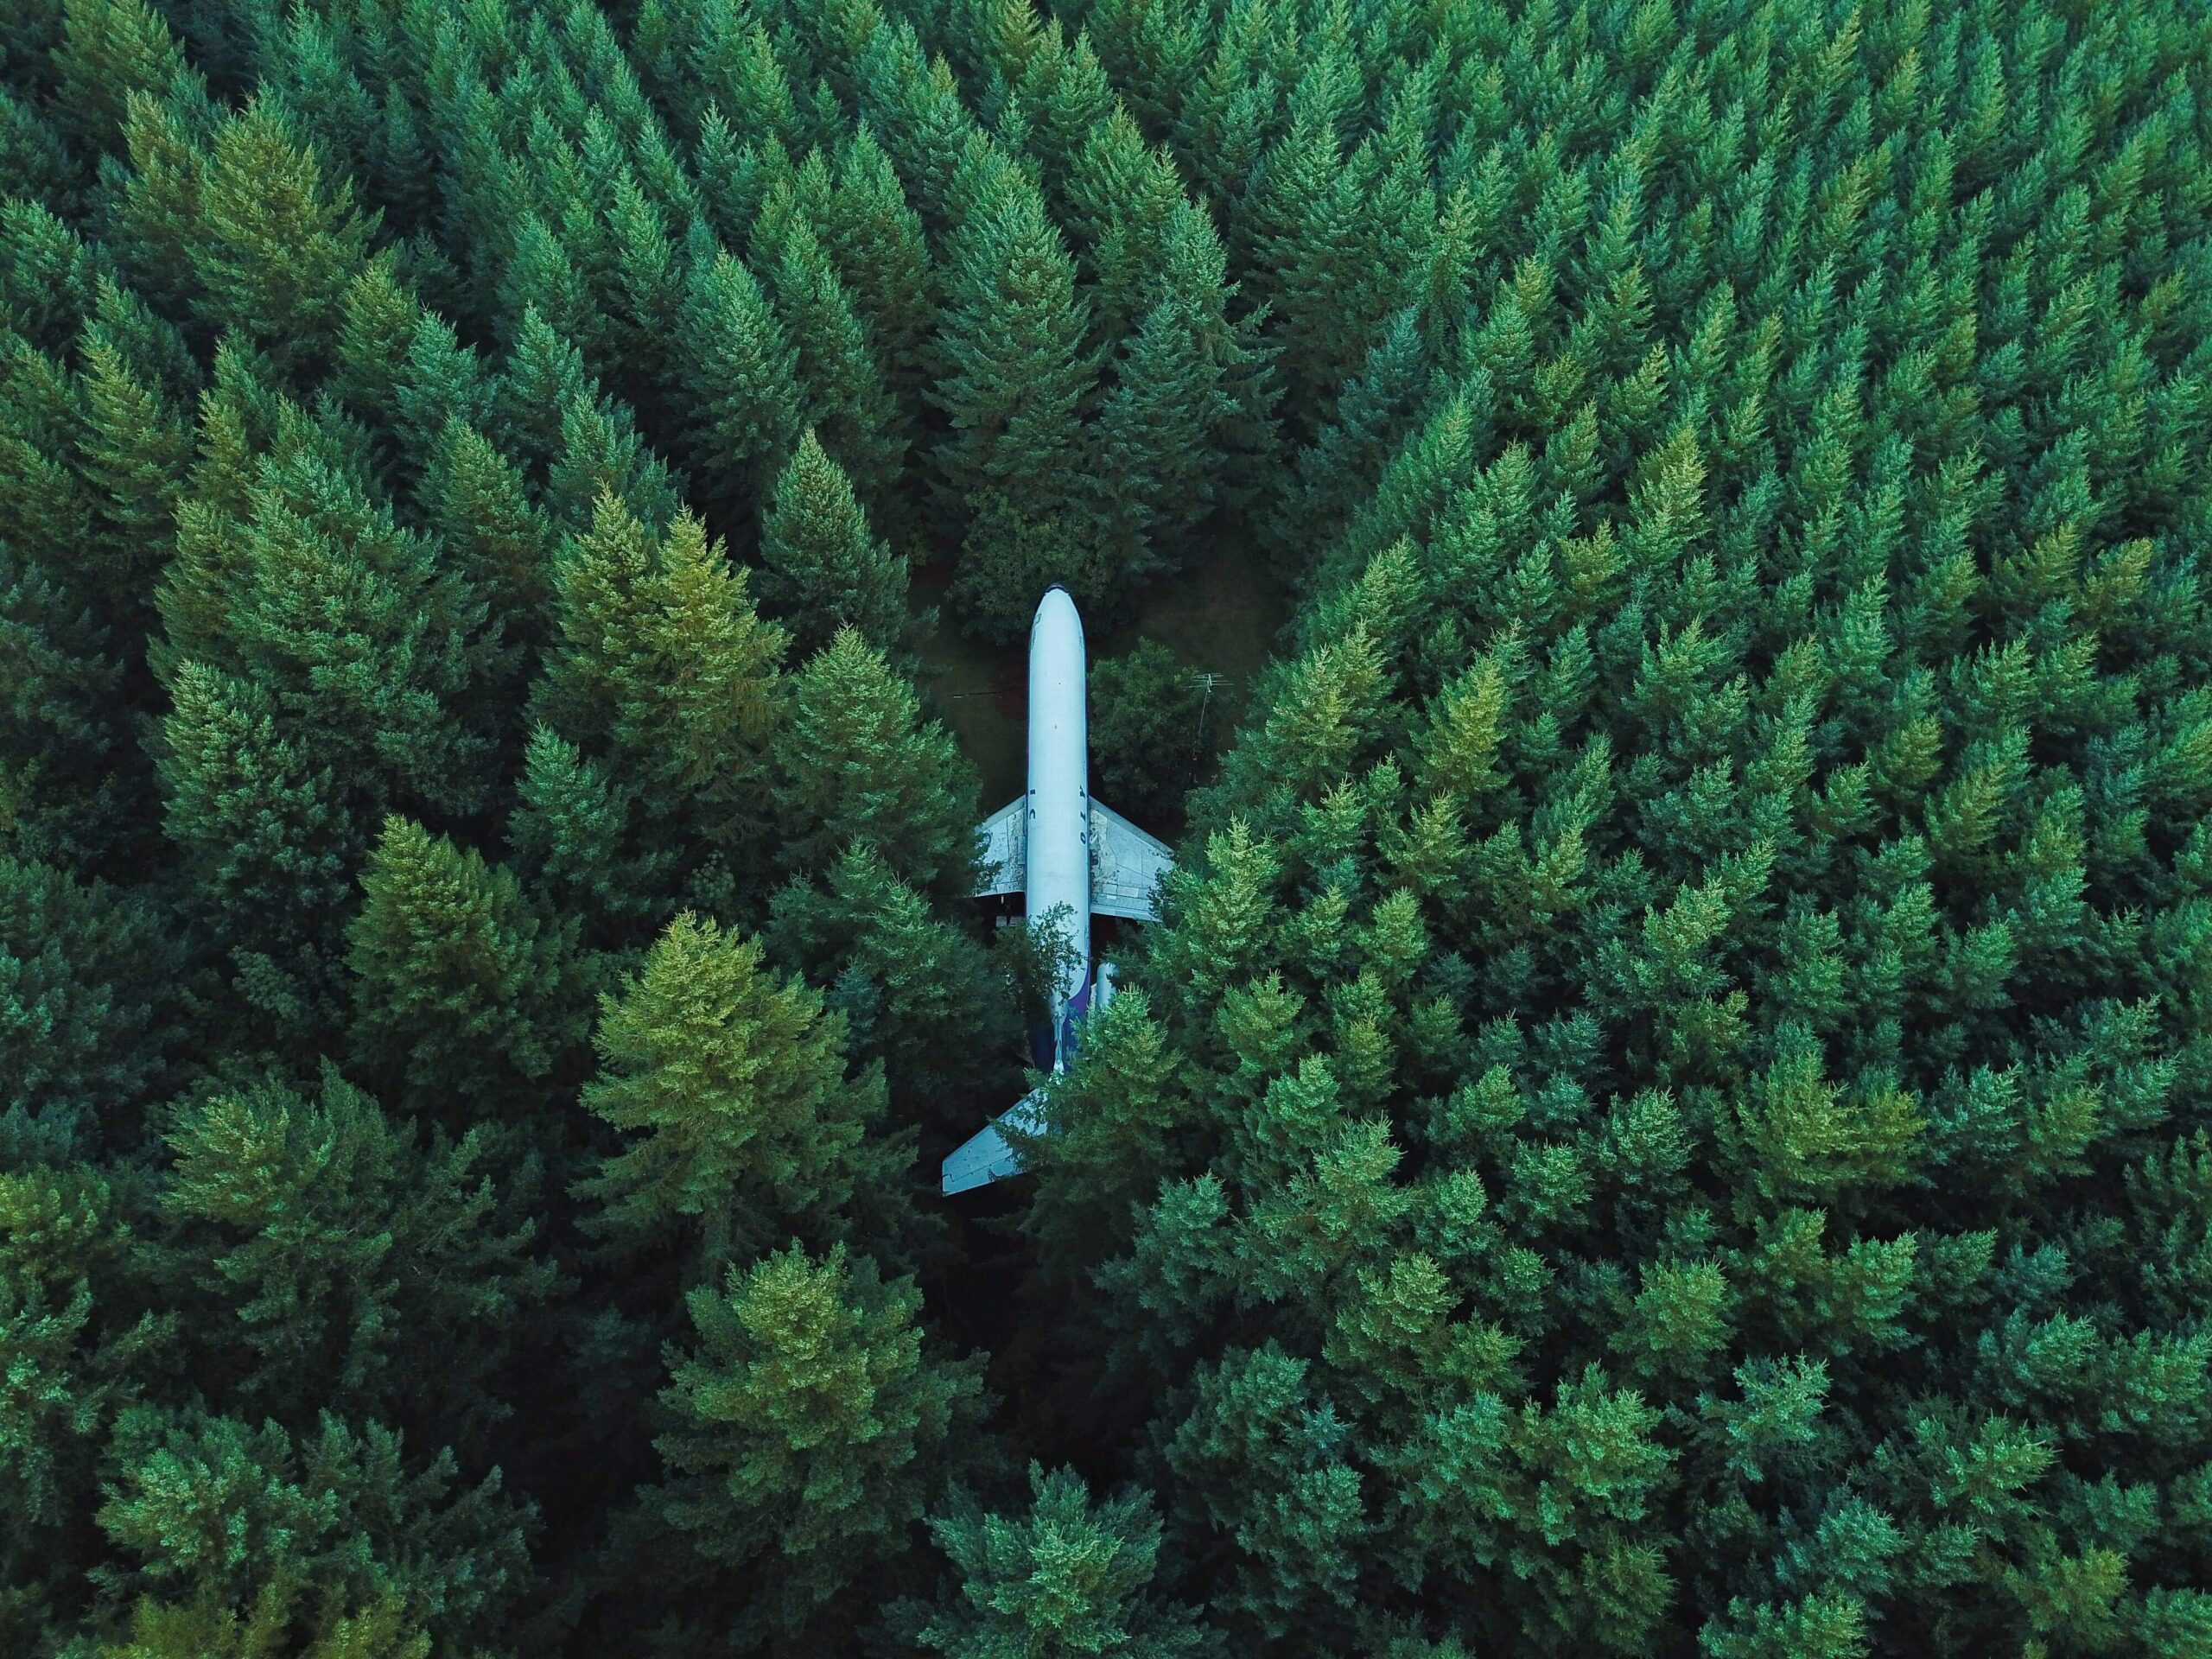 An airplane in a forest